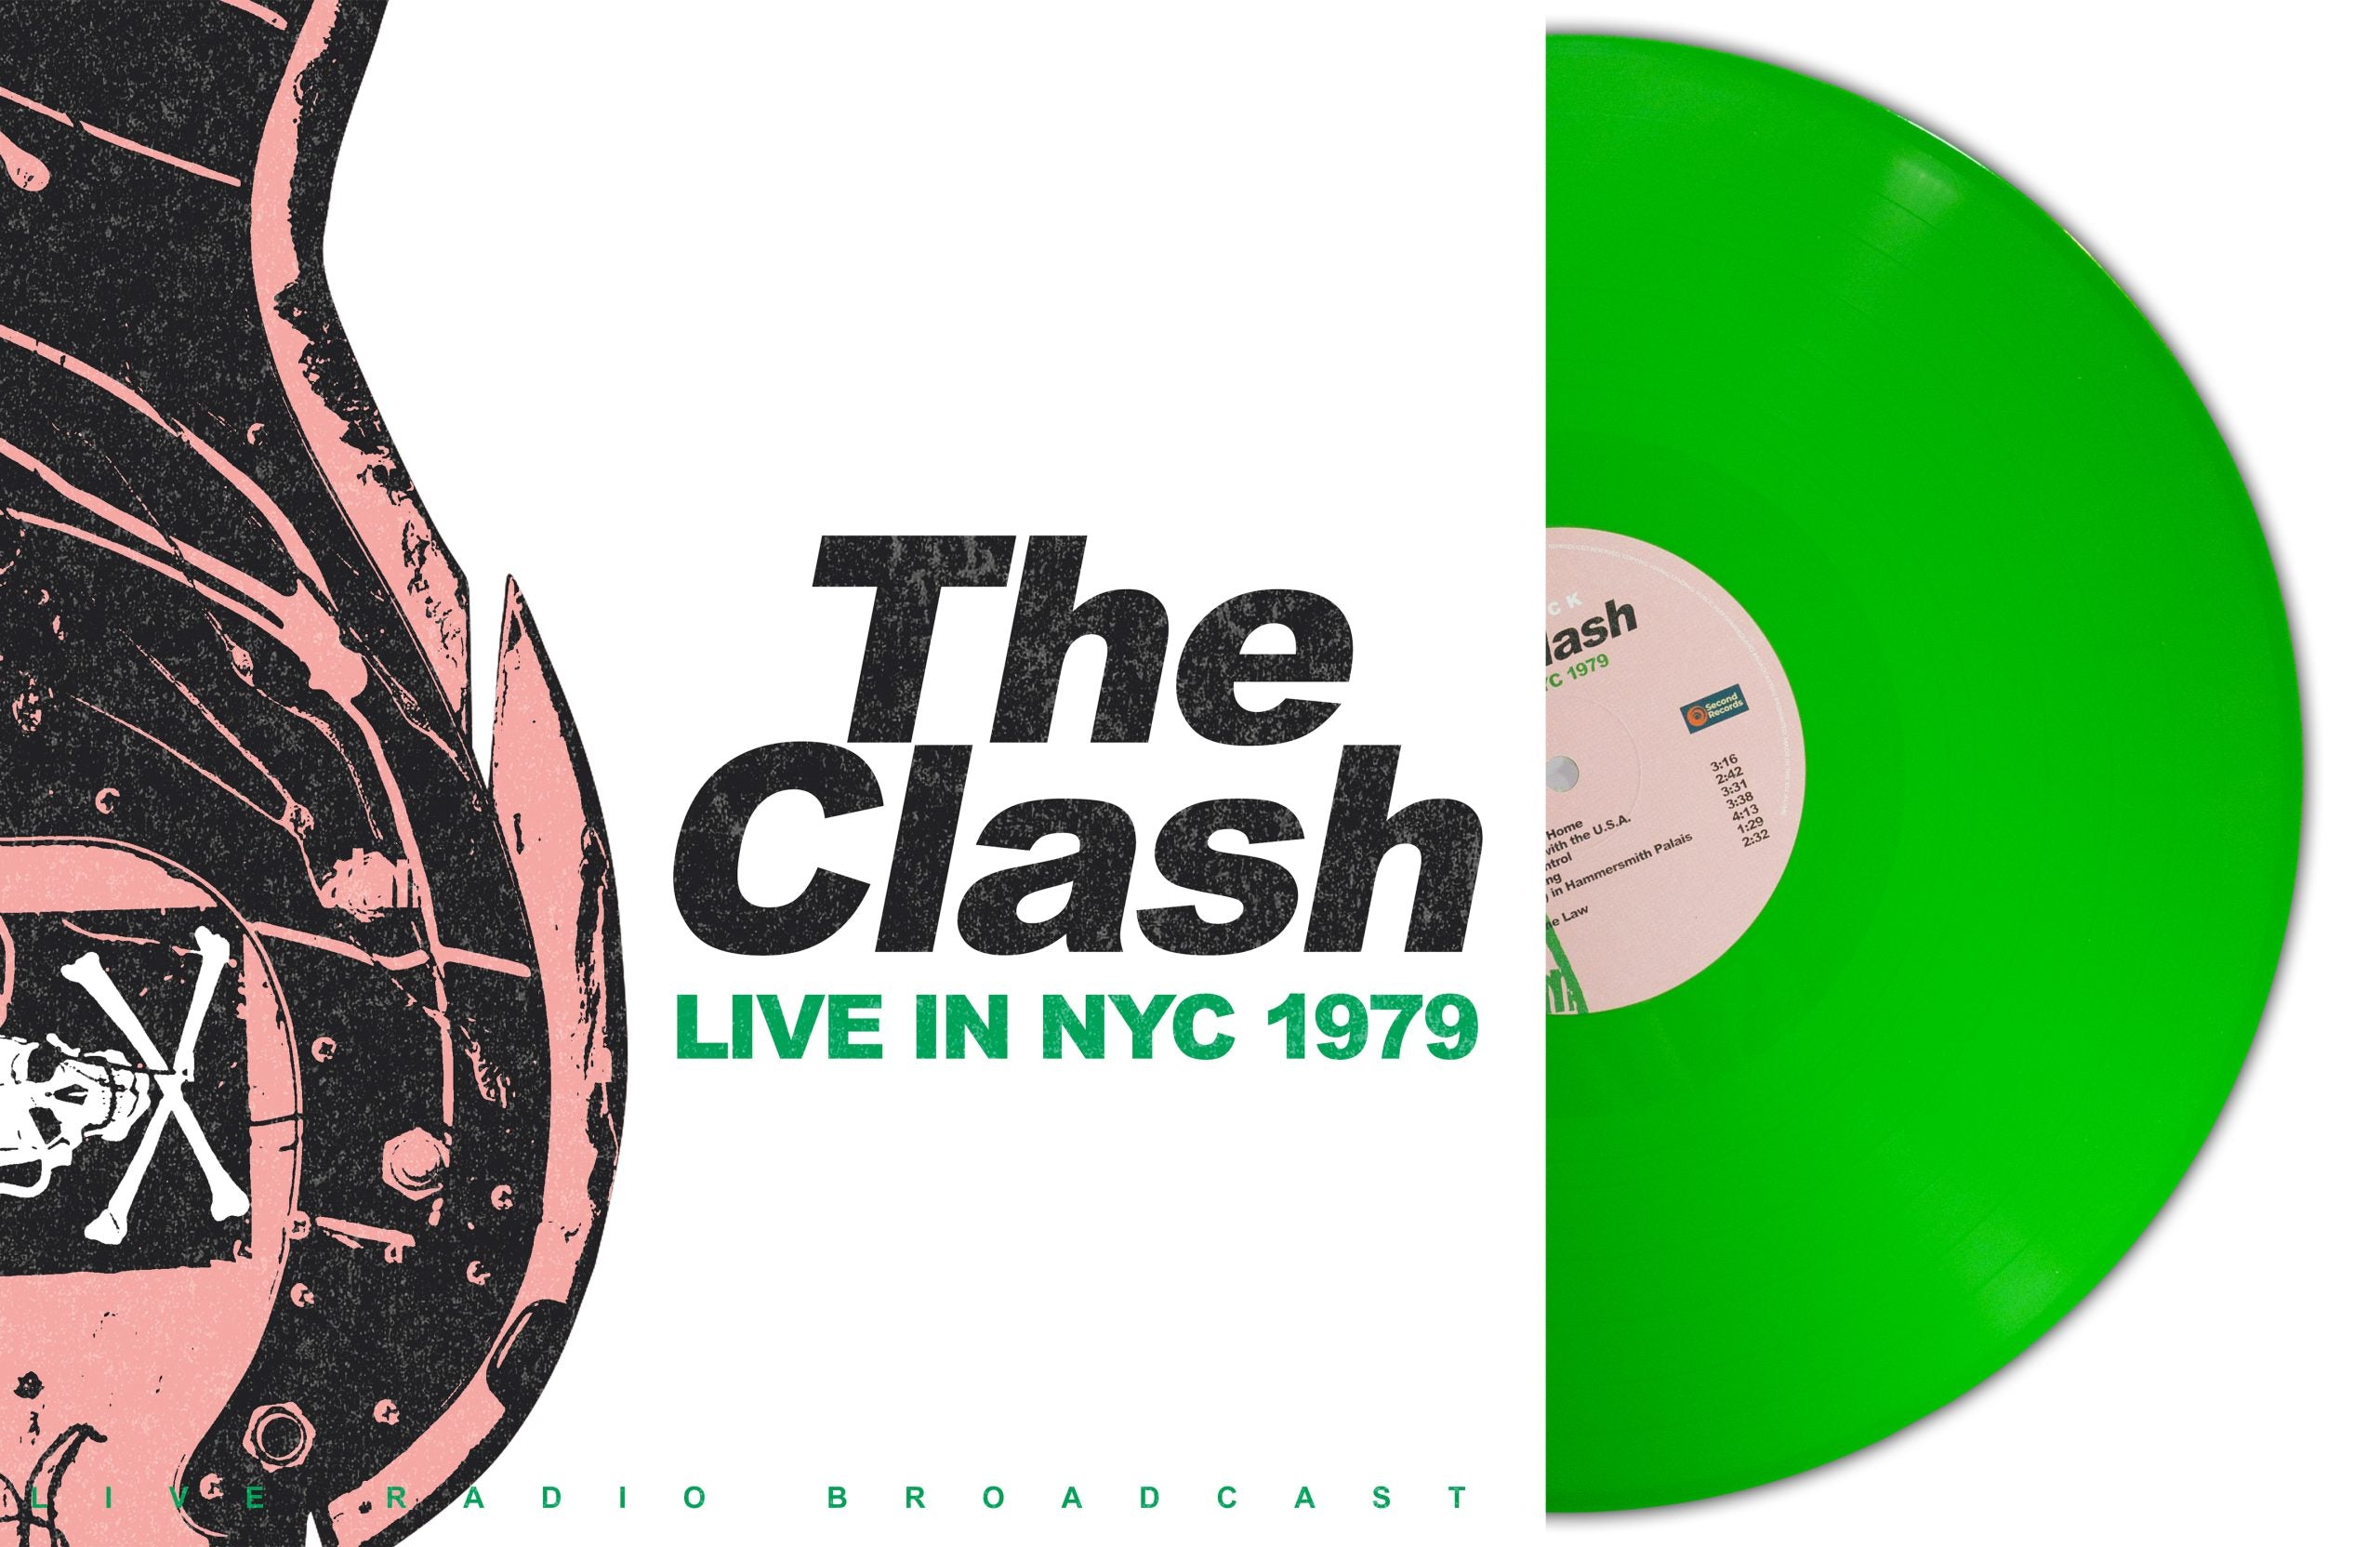 Clash, The - Live In NYC 1979 [LP] Limited 180gram Green Colored Vinyl (import)